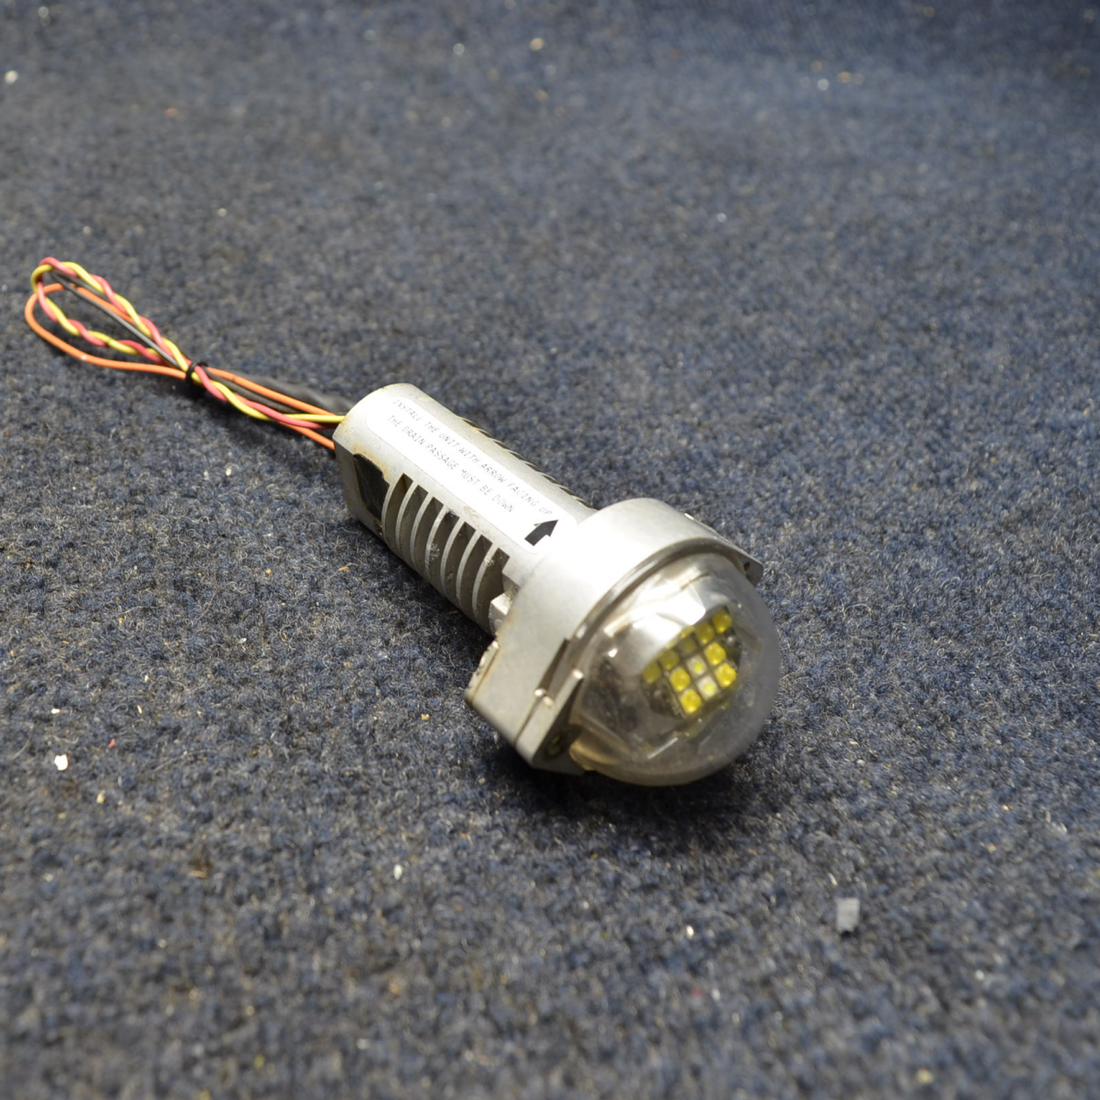 Used aircraft parts for sale, 01-0771774V01 PIPER PA28-140 WHELEN TAIL LIGHT ORION 12V